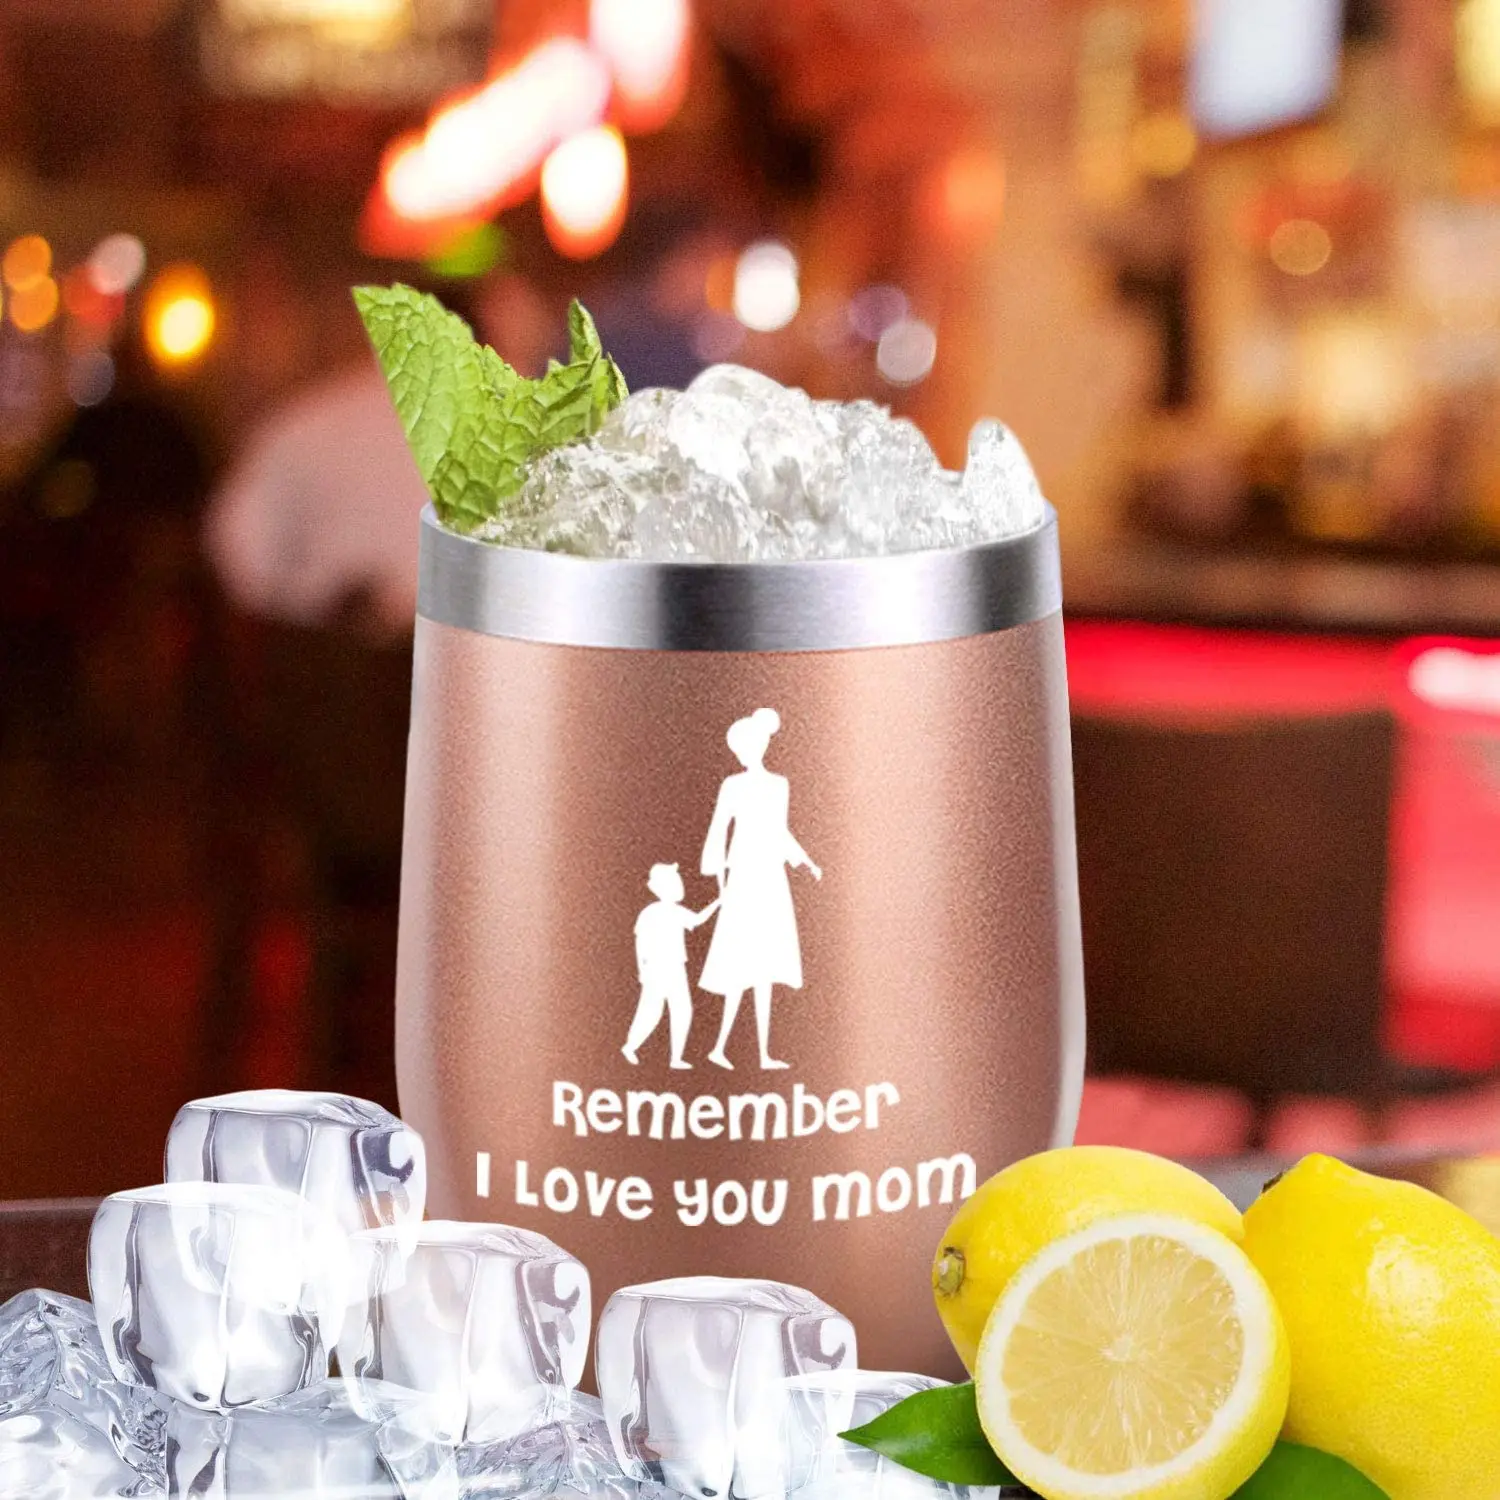 https://ae01.alicdn.com/kf/Sf87967c1023d4278964f6da590839440G/12oz-wine-tumbler-gift-ideas-friends-birthday-gifts-for-women-mother-day-gifts-for-mom-grandma.jpg